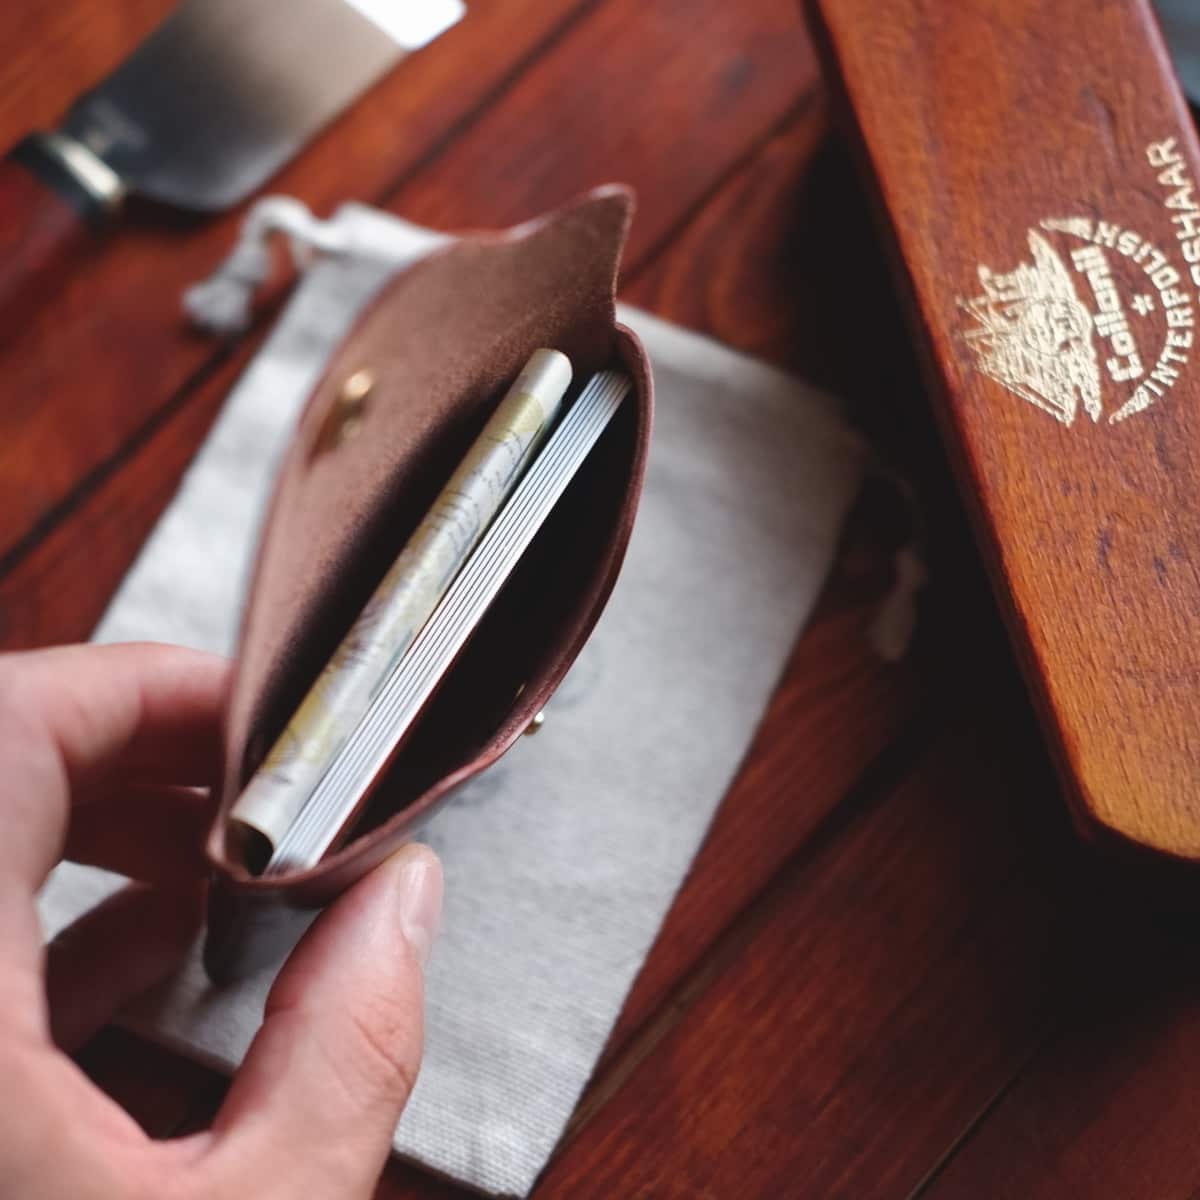 The Jack Stitchless Wallet in Firenze Lux leather interior view with credit cards and banknotes